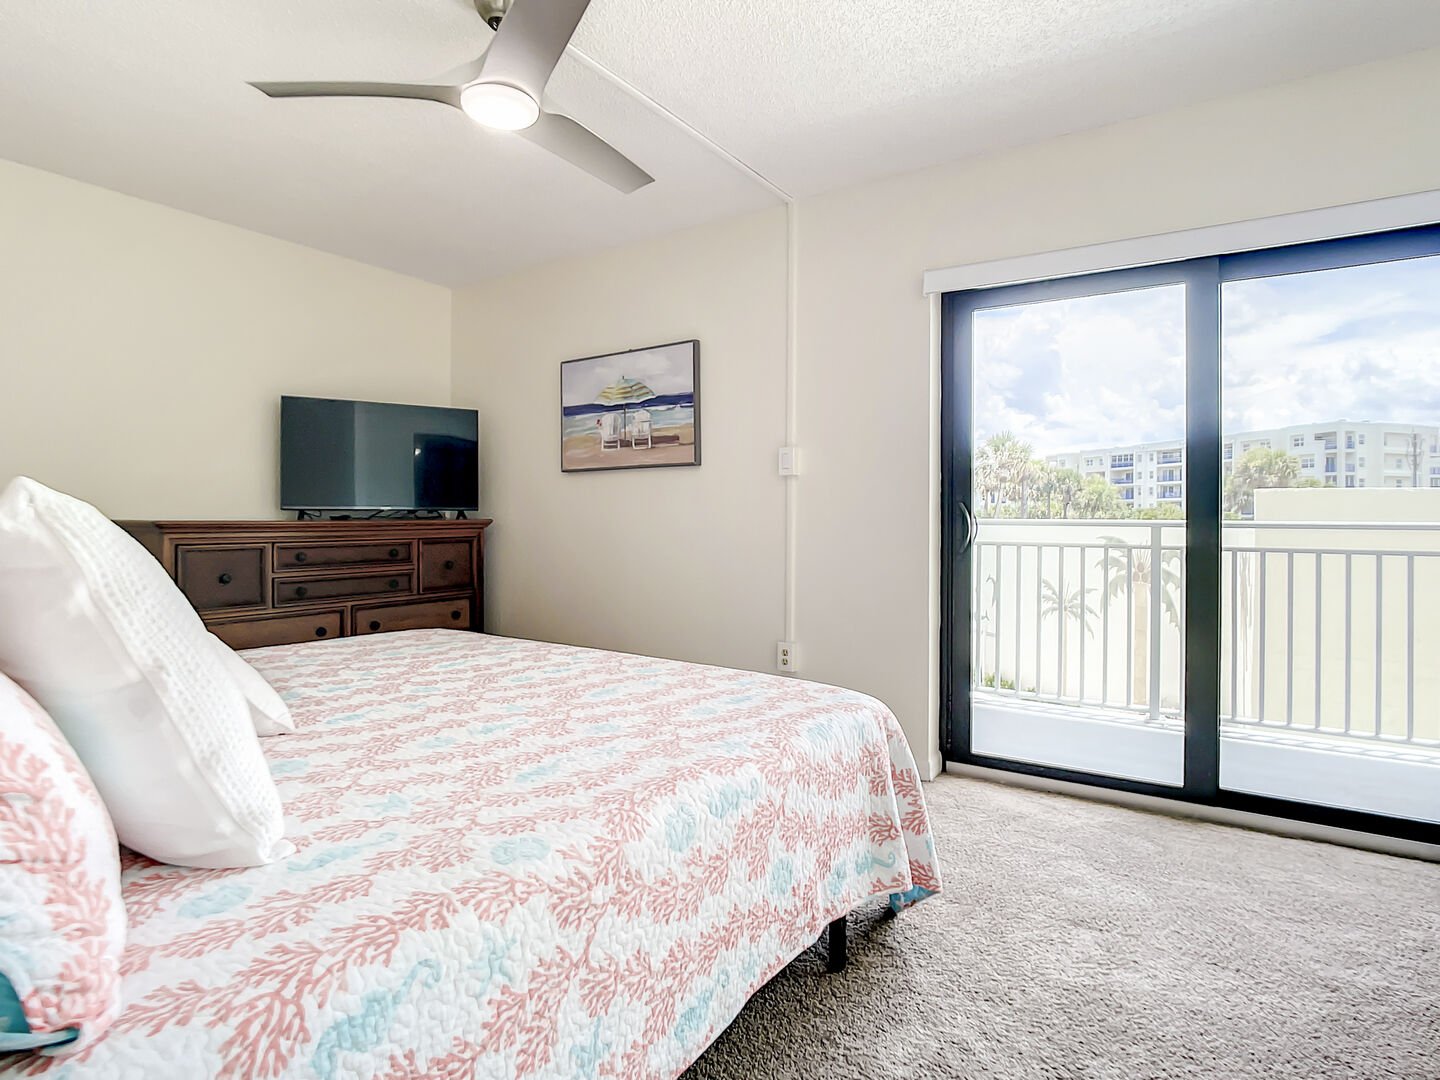 The spacious master bedroom offers a king size bed, flat screen TV and sliders to the balcony.